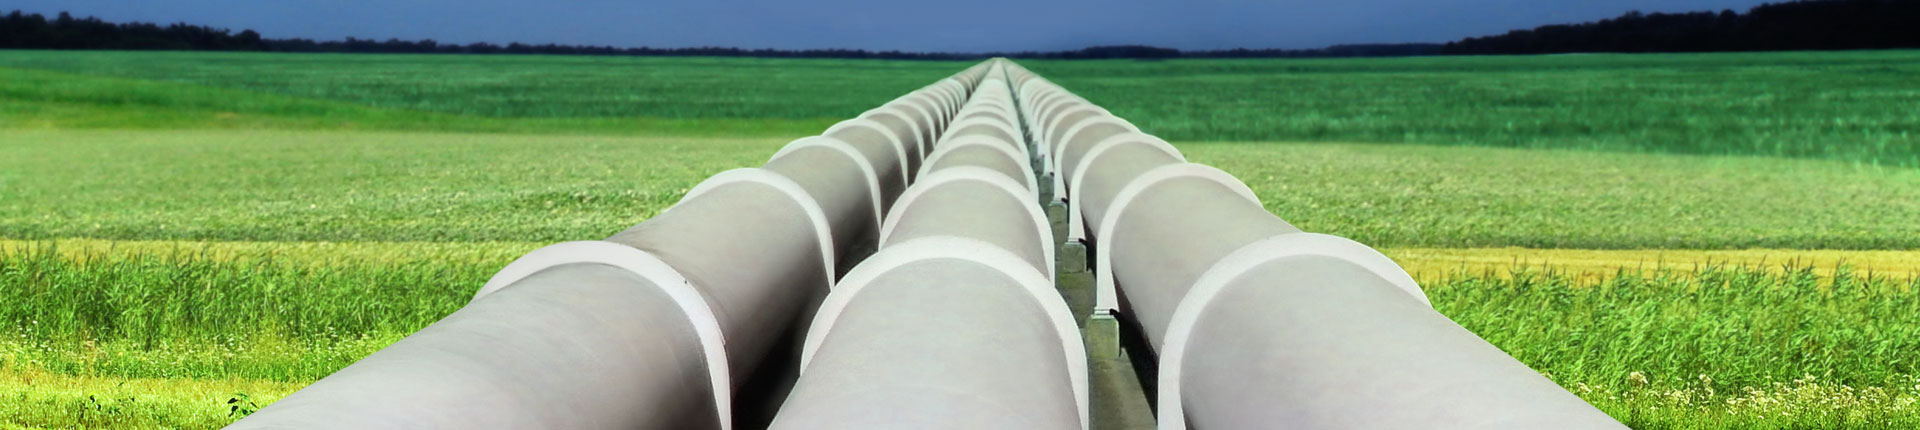 3 large pipelines in a green filed